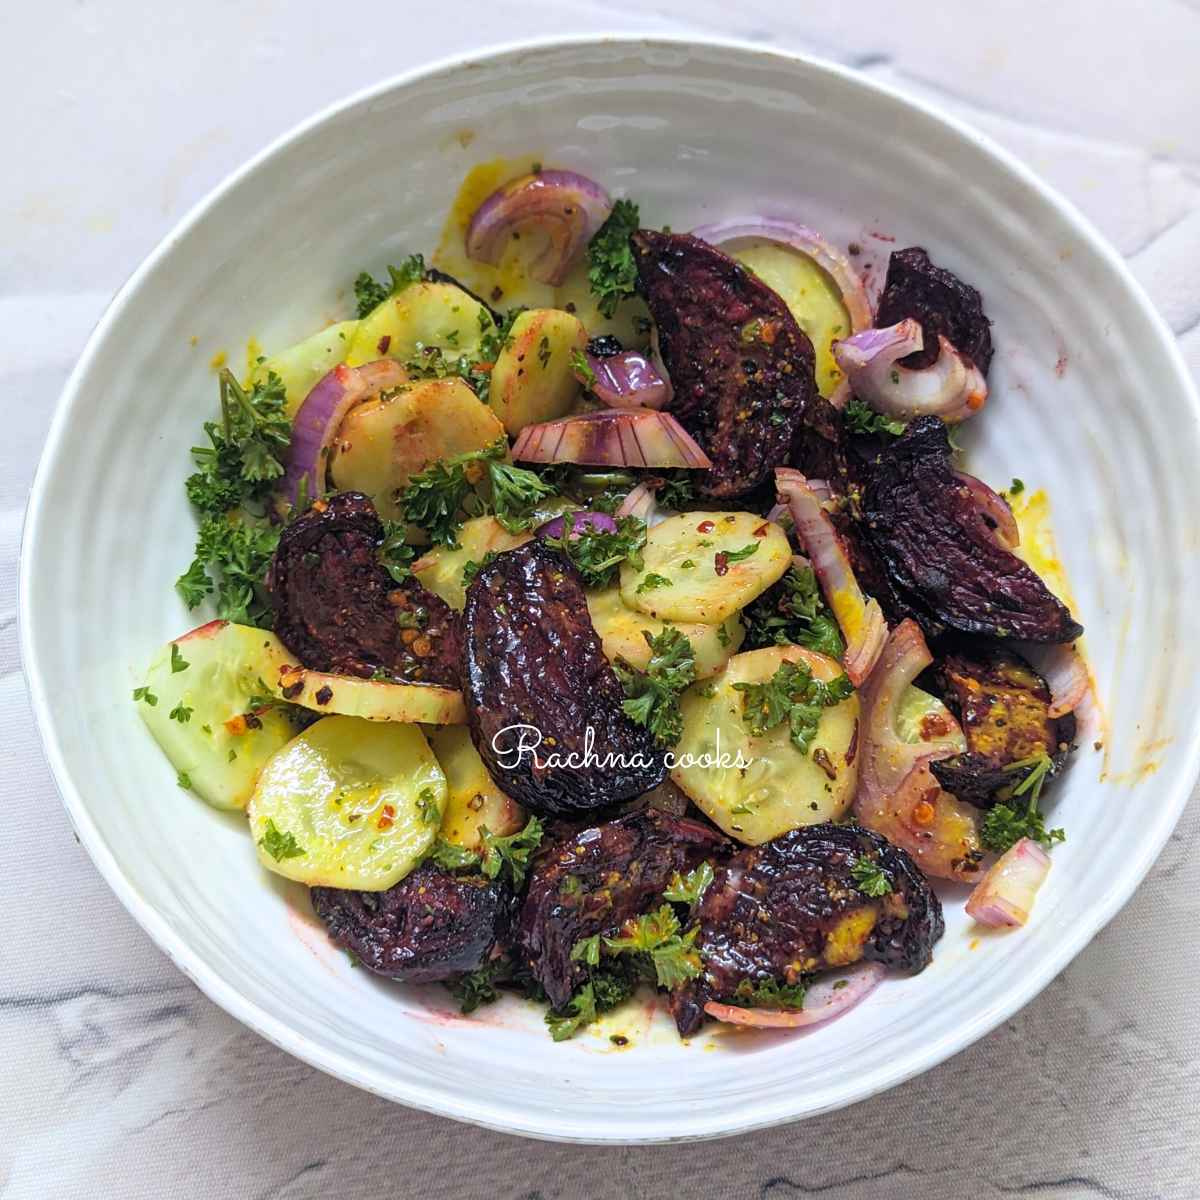 Cucumber beet salad in a bowl